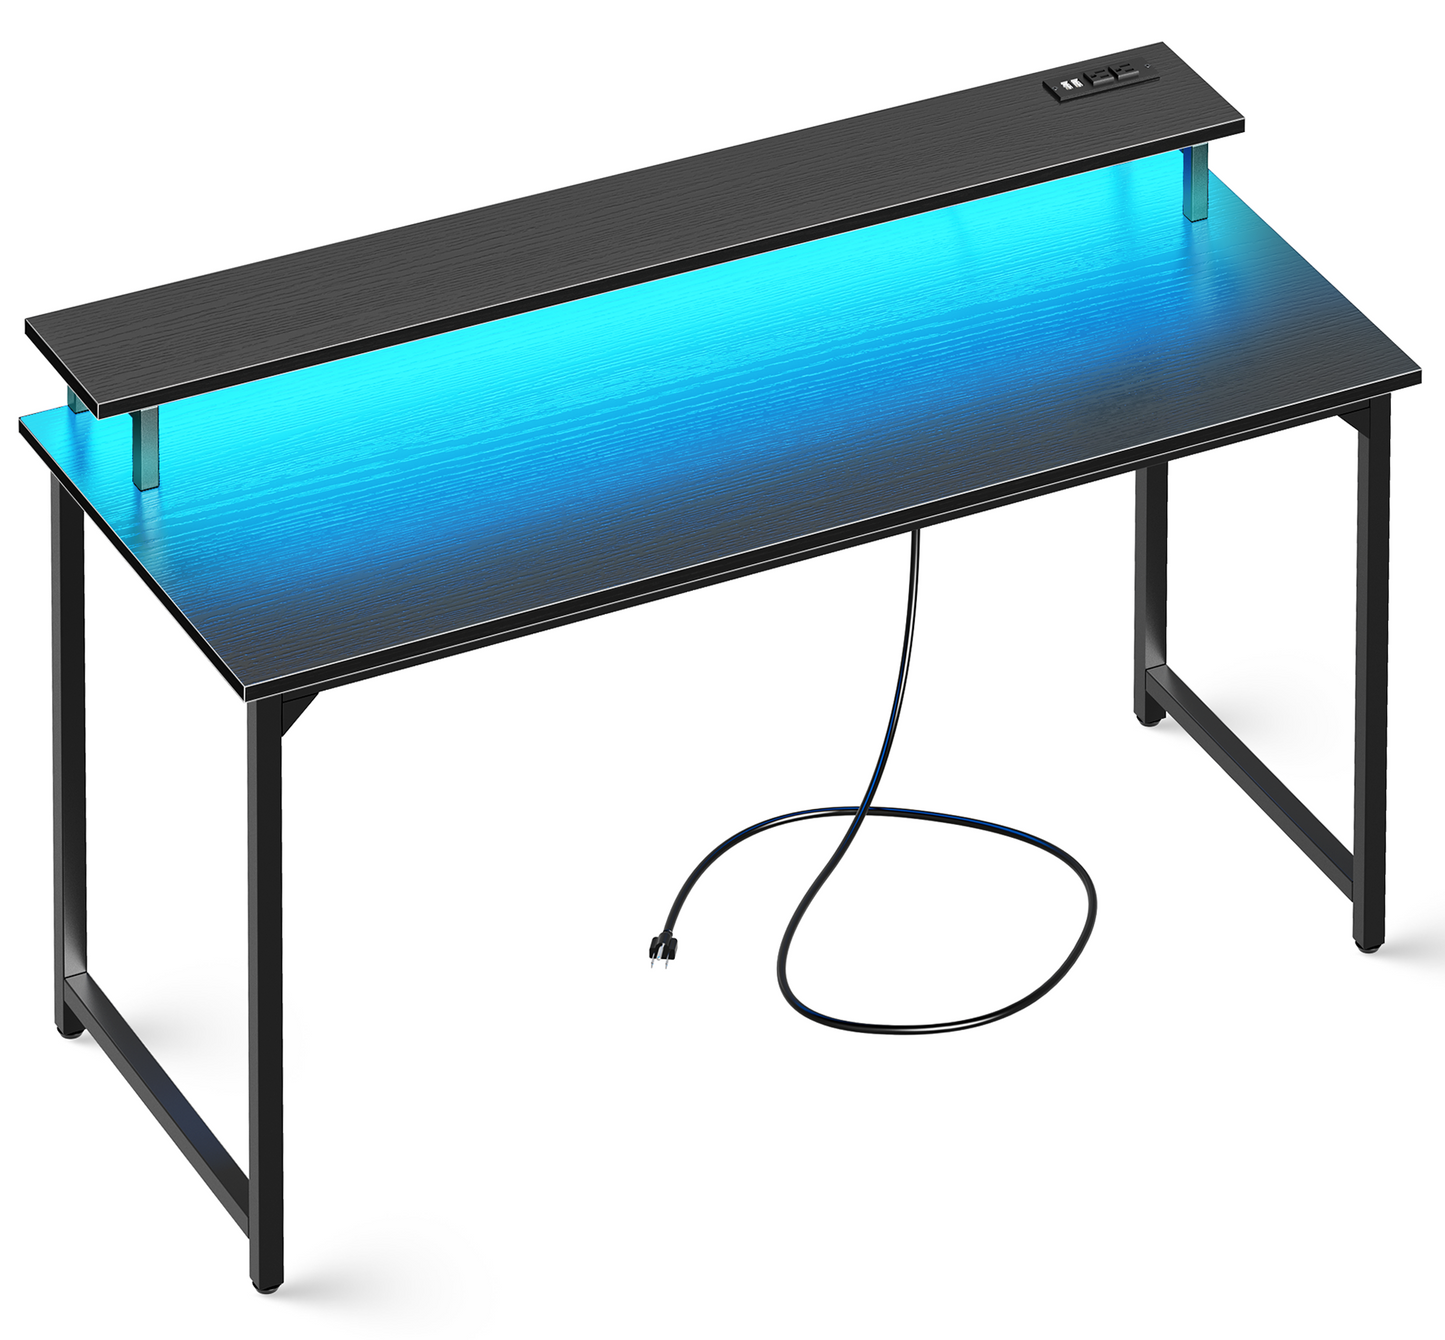 SUPERJARE 55 inch Computer Desk with LED Lights & Power Outlets, Gaming Desk with Monitor Shelf, Small Office Desk for Home & Office, Black